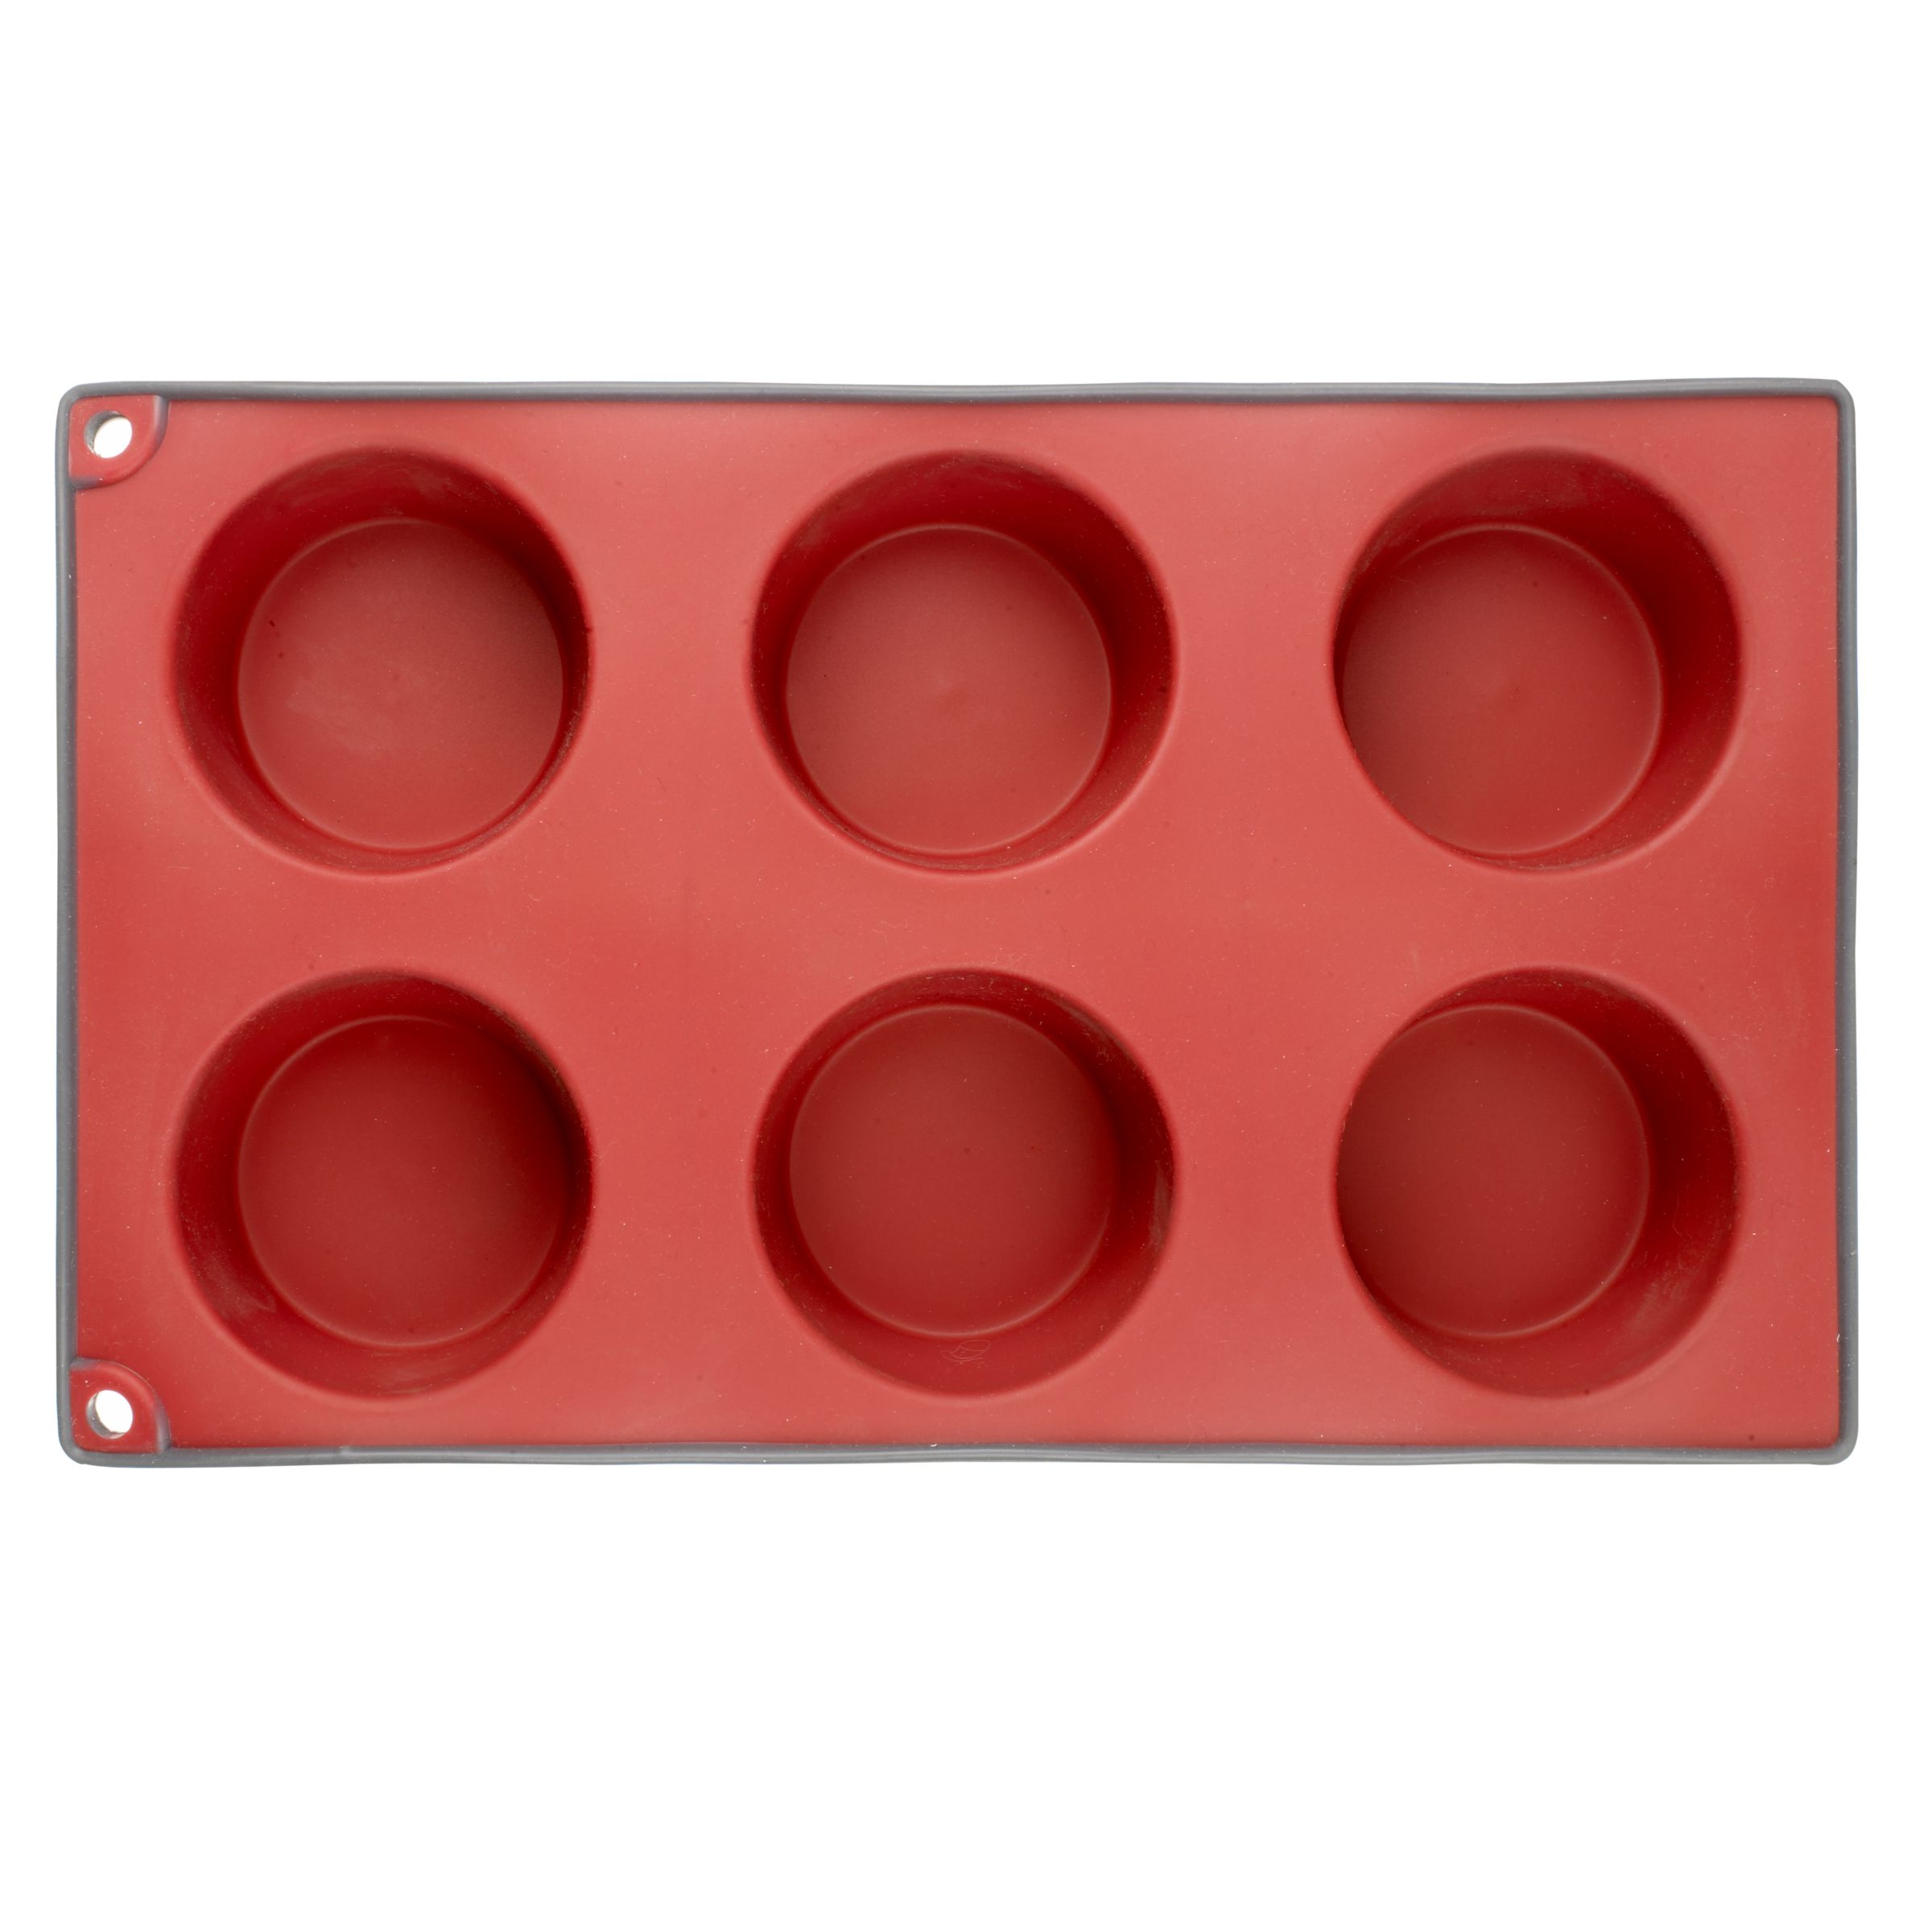 John Lewis 6 Cup Muffin Mould, Red